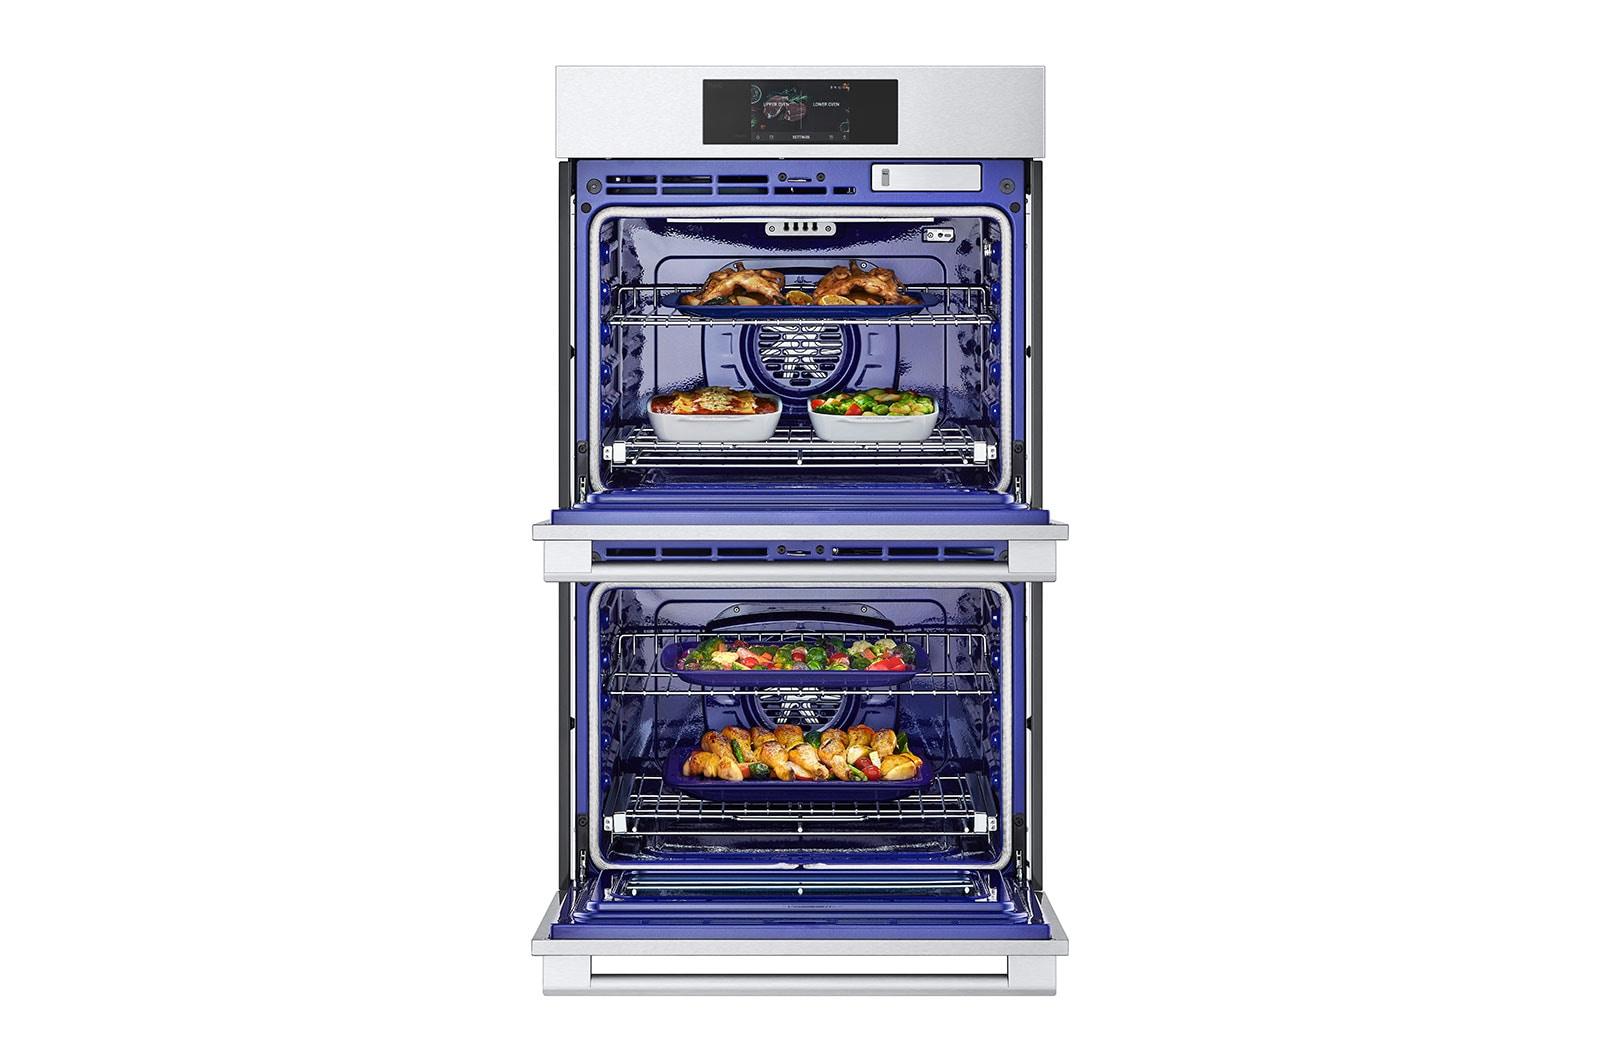 LG STUDIO 9.4 cu. ft. Smart InstaView® Electric Double Built-In Wall Oven with Air Fry